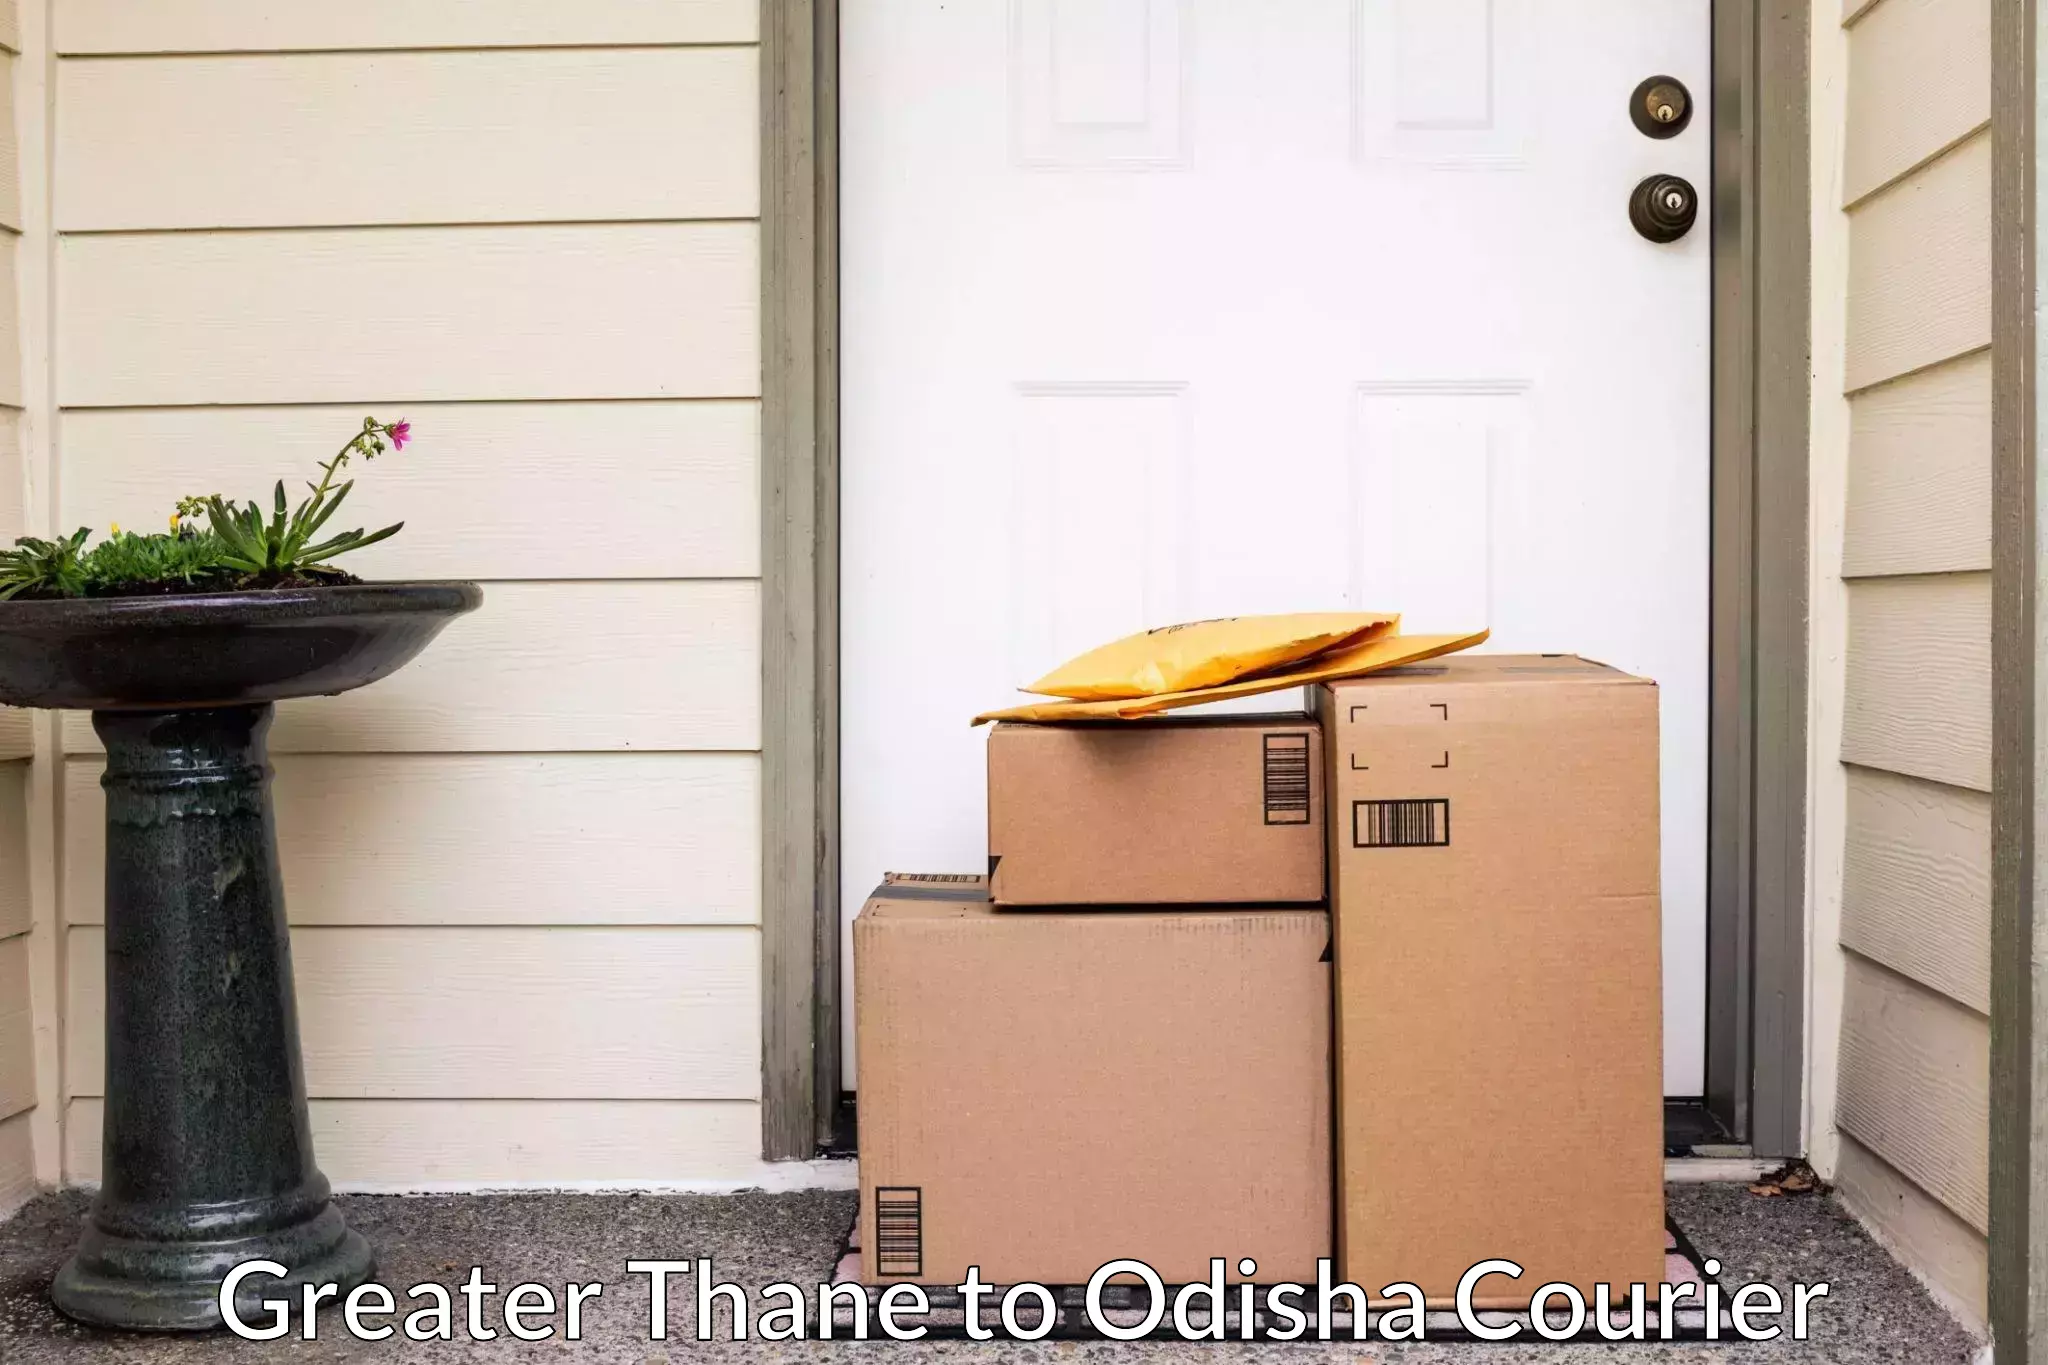 Residential moving experts Greater Thane to Dukura